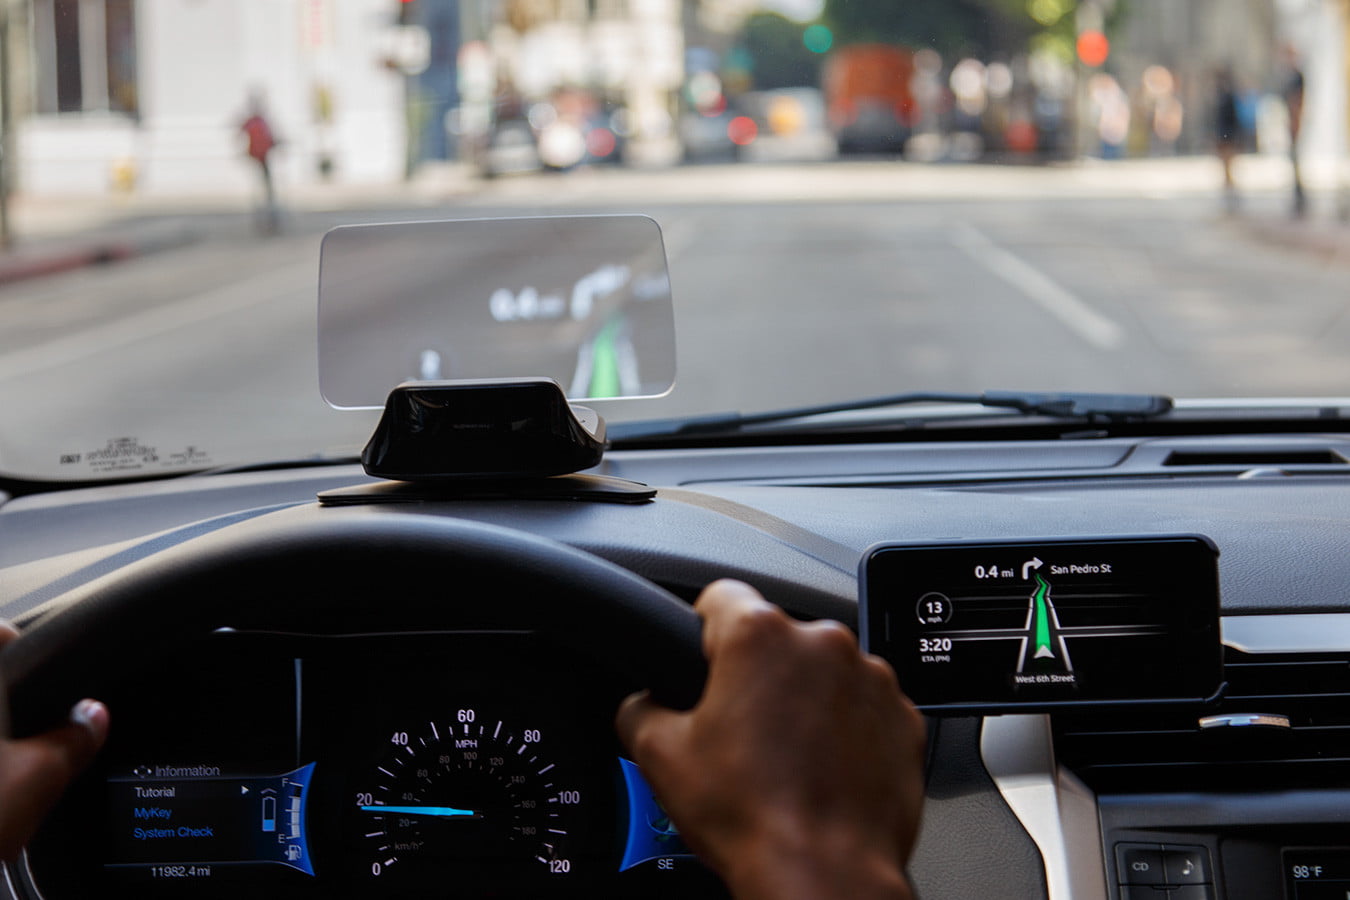 COVID-19 Impact on Automotive Hud in Automotive Industry